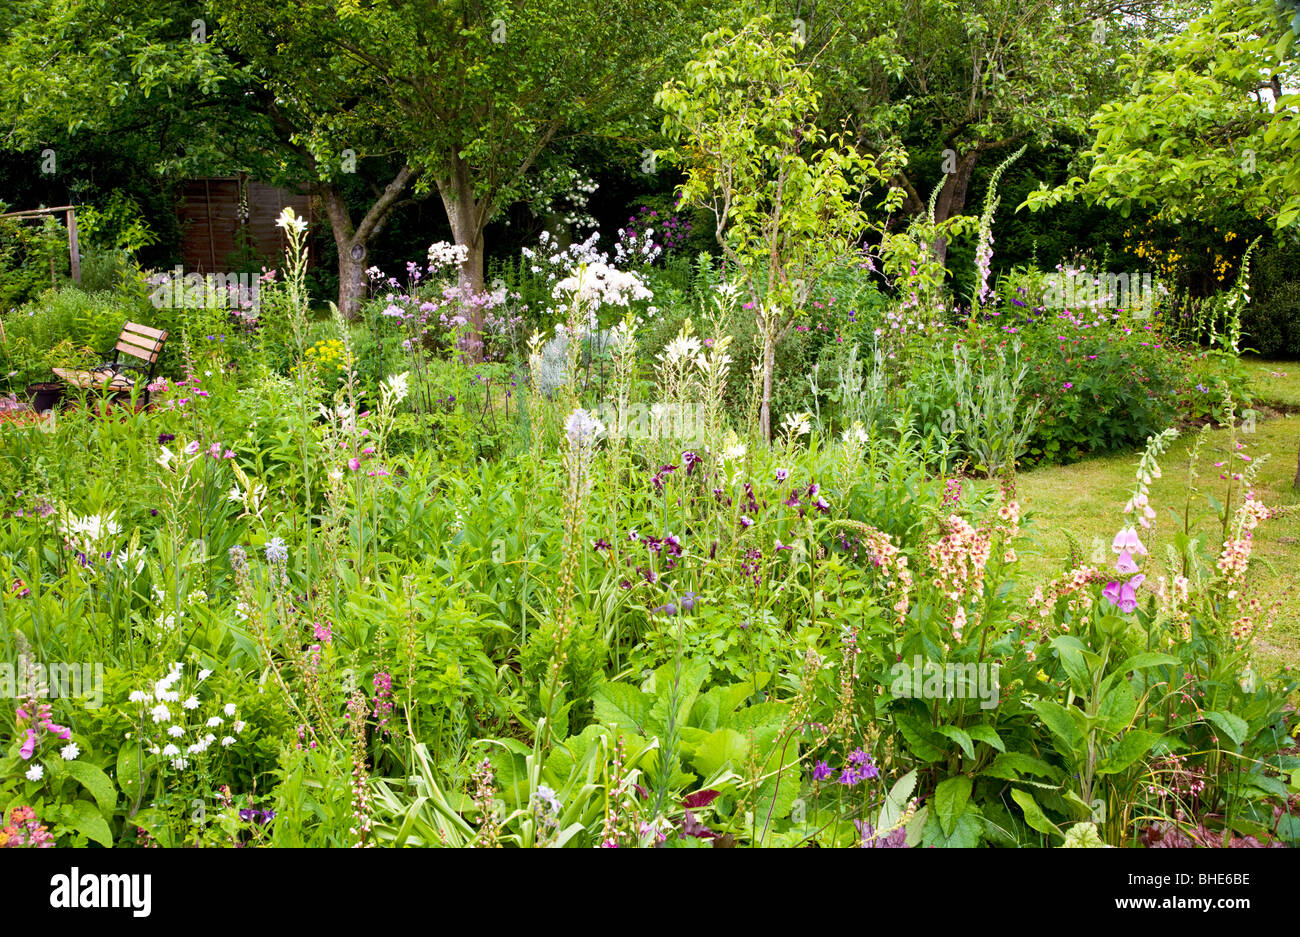 A typical English country or town, suburban garden in late May Stock Photo